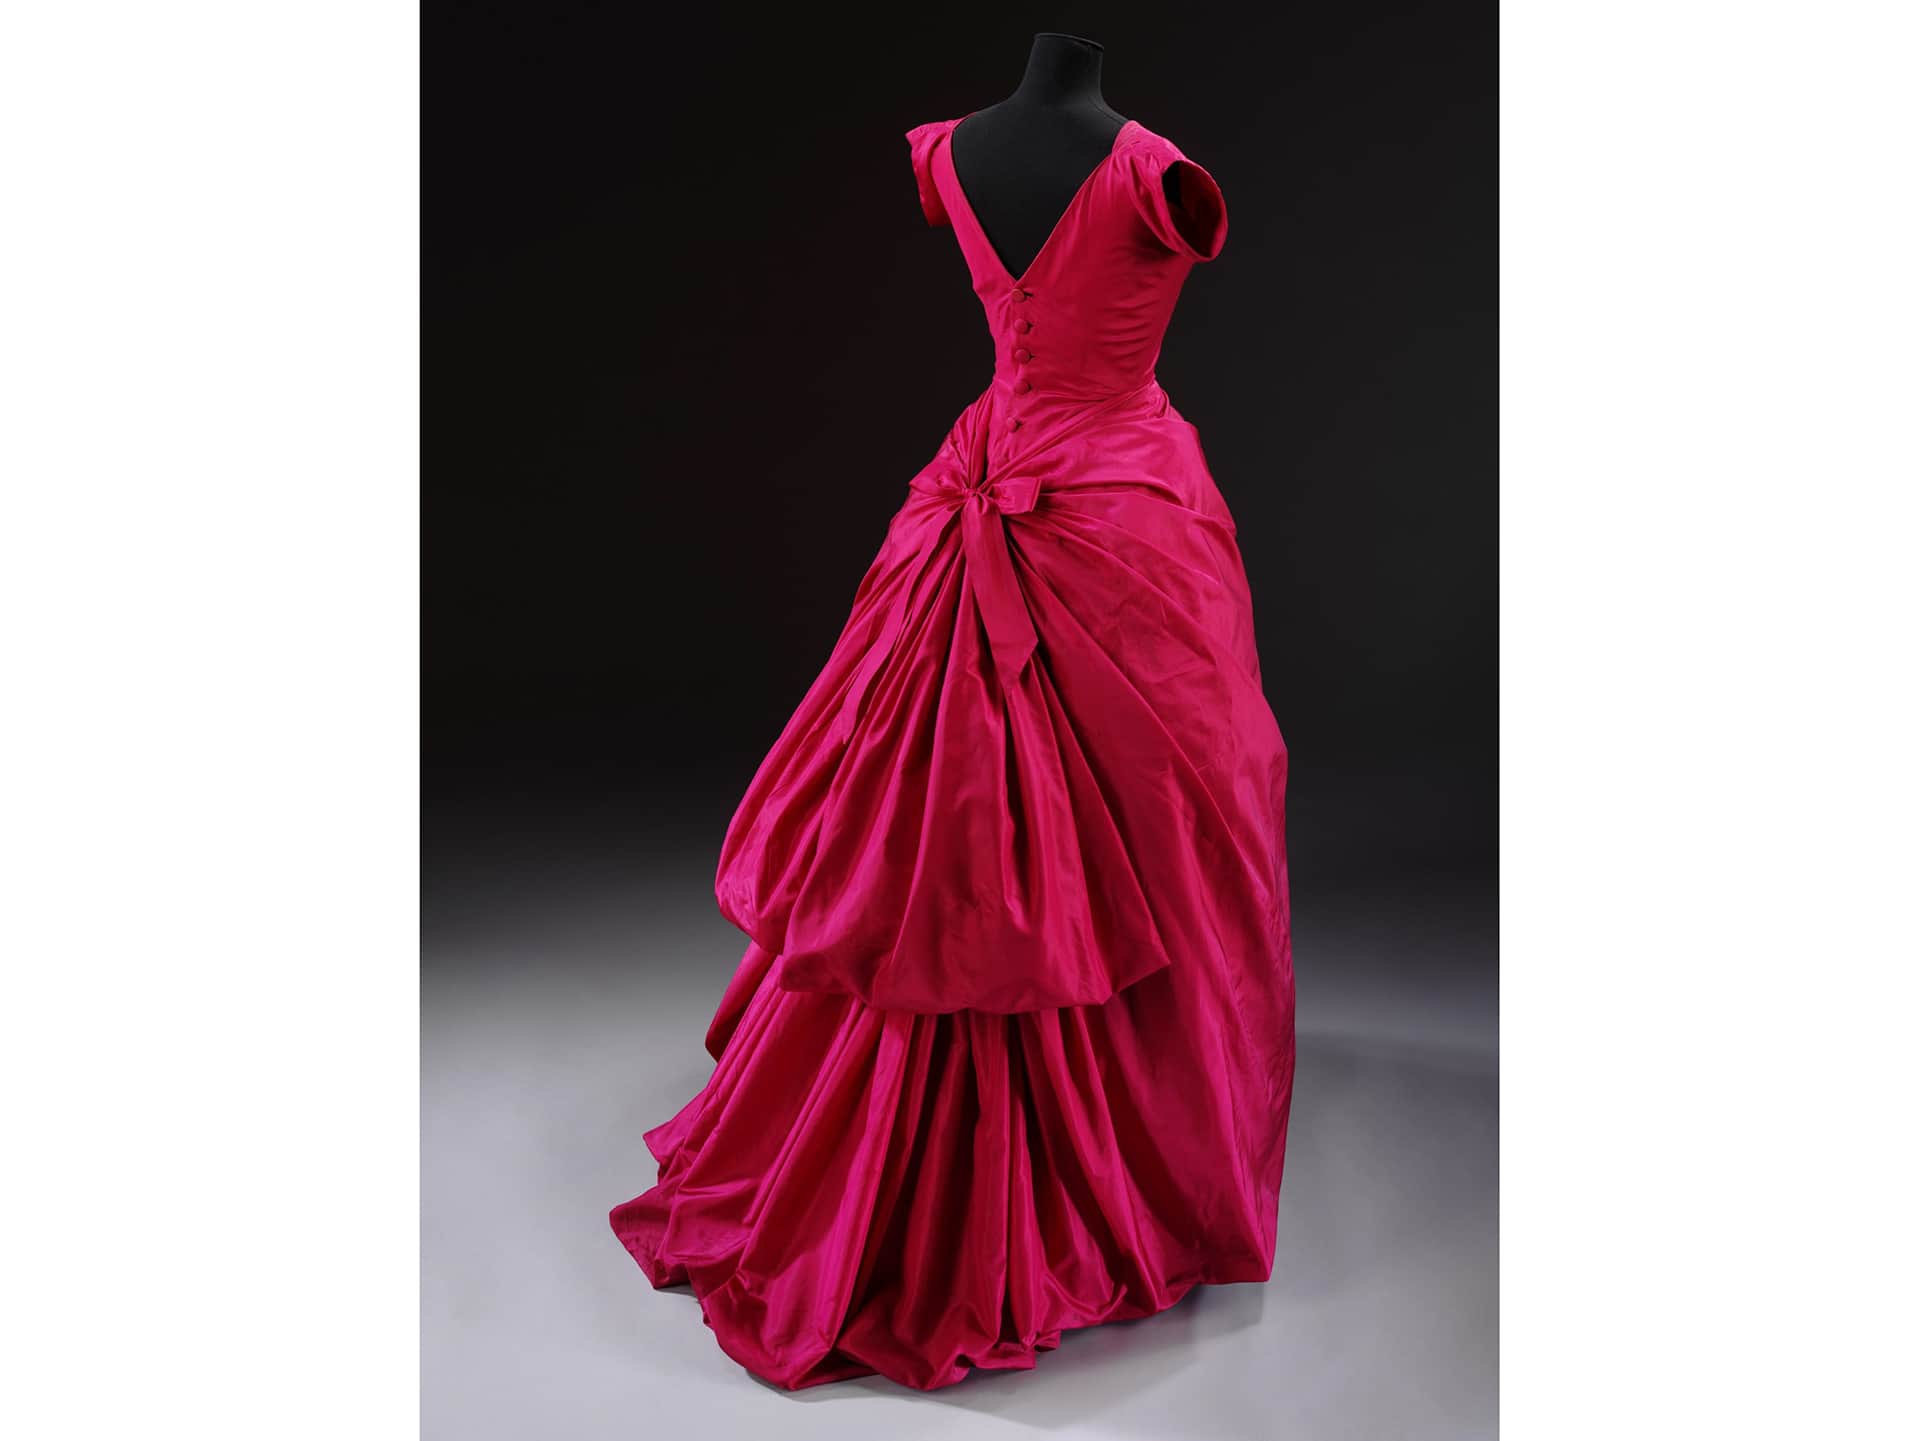 A rare chance to see gowns by Cristobal Balenciaga in new Paris